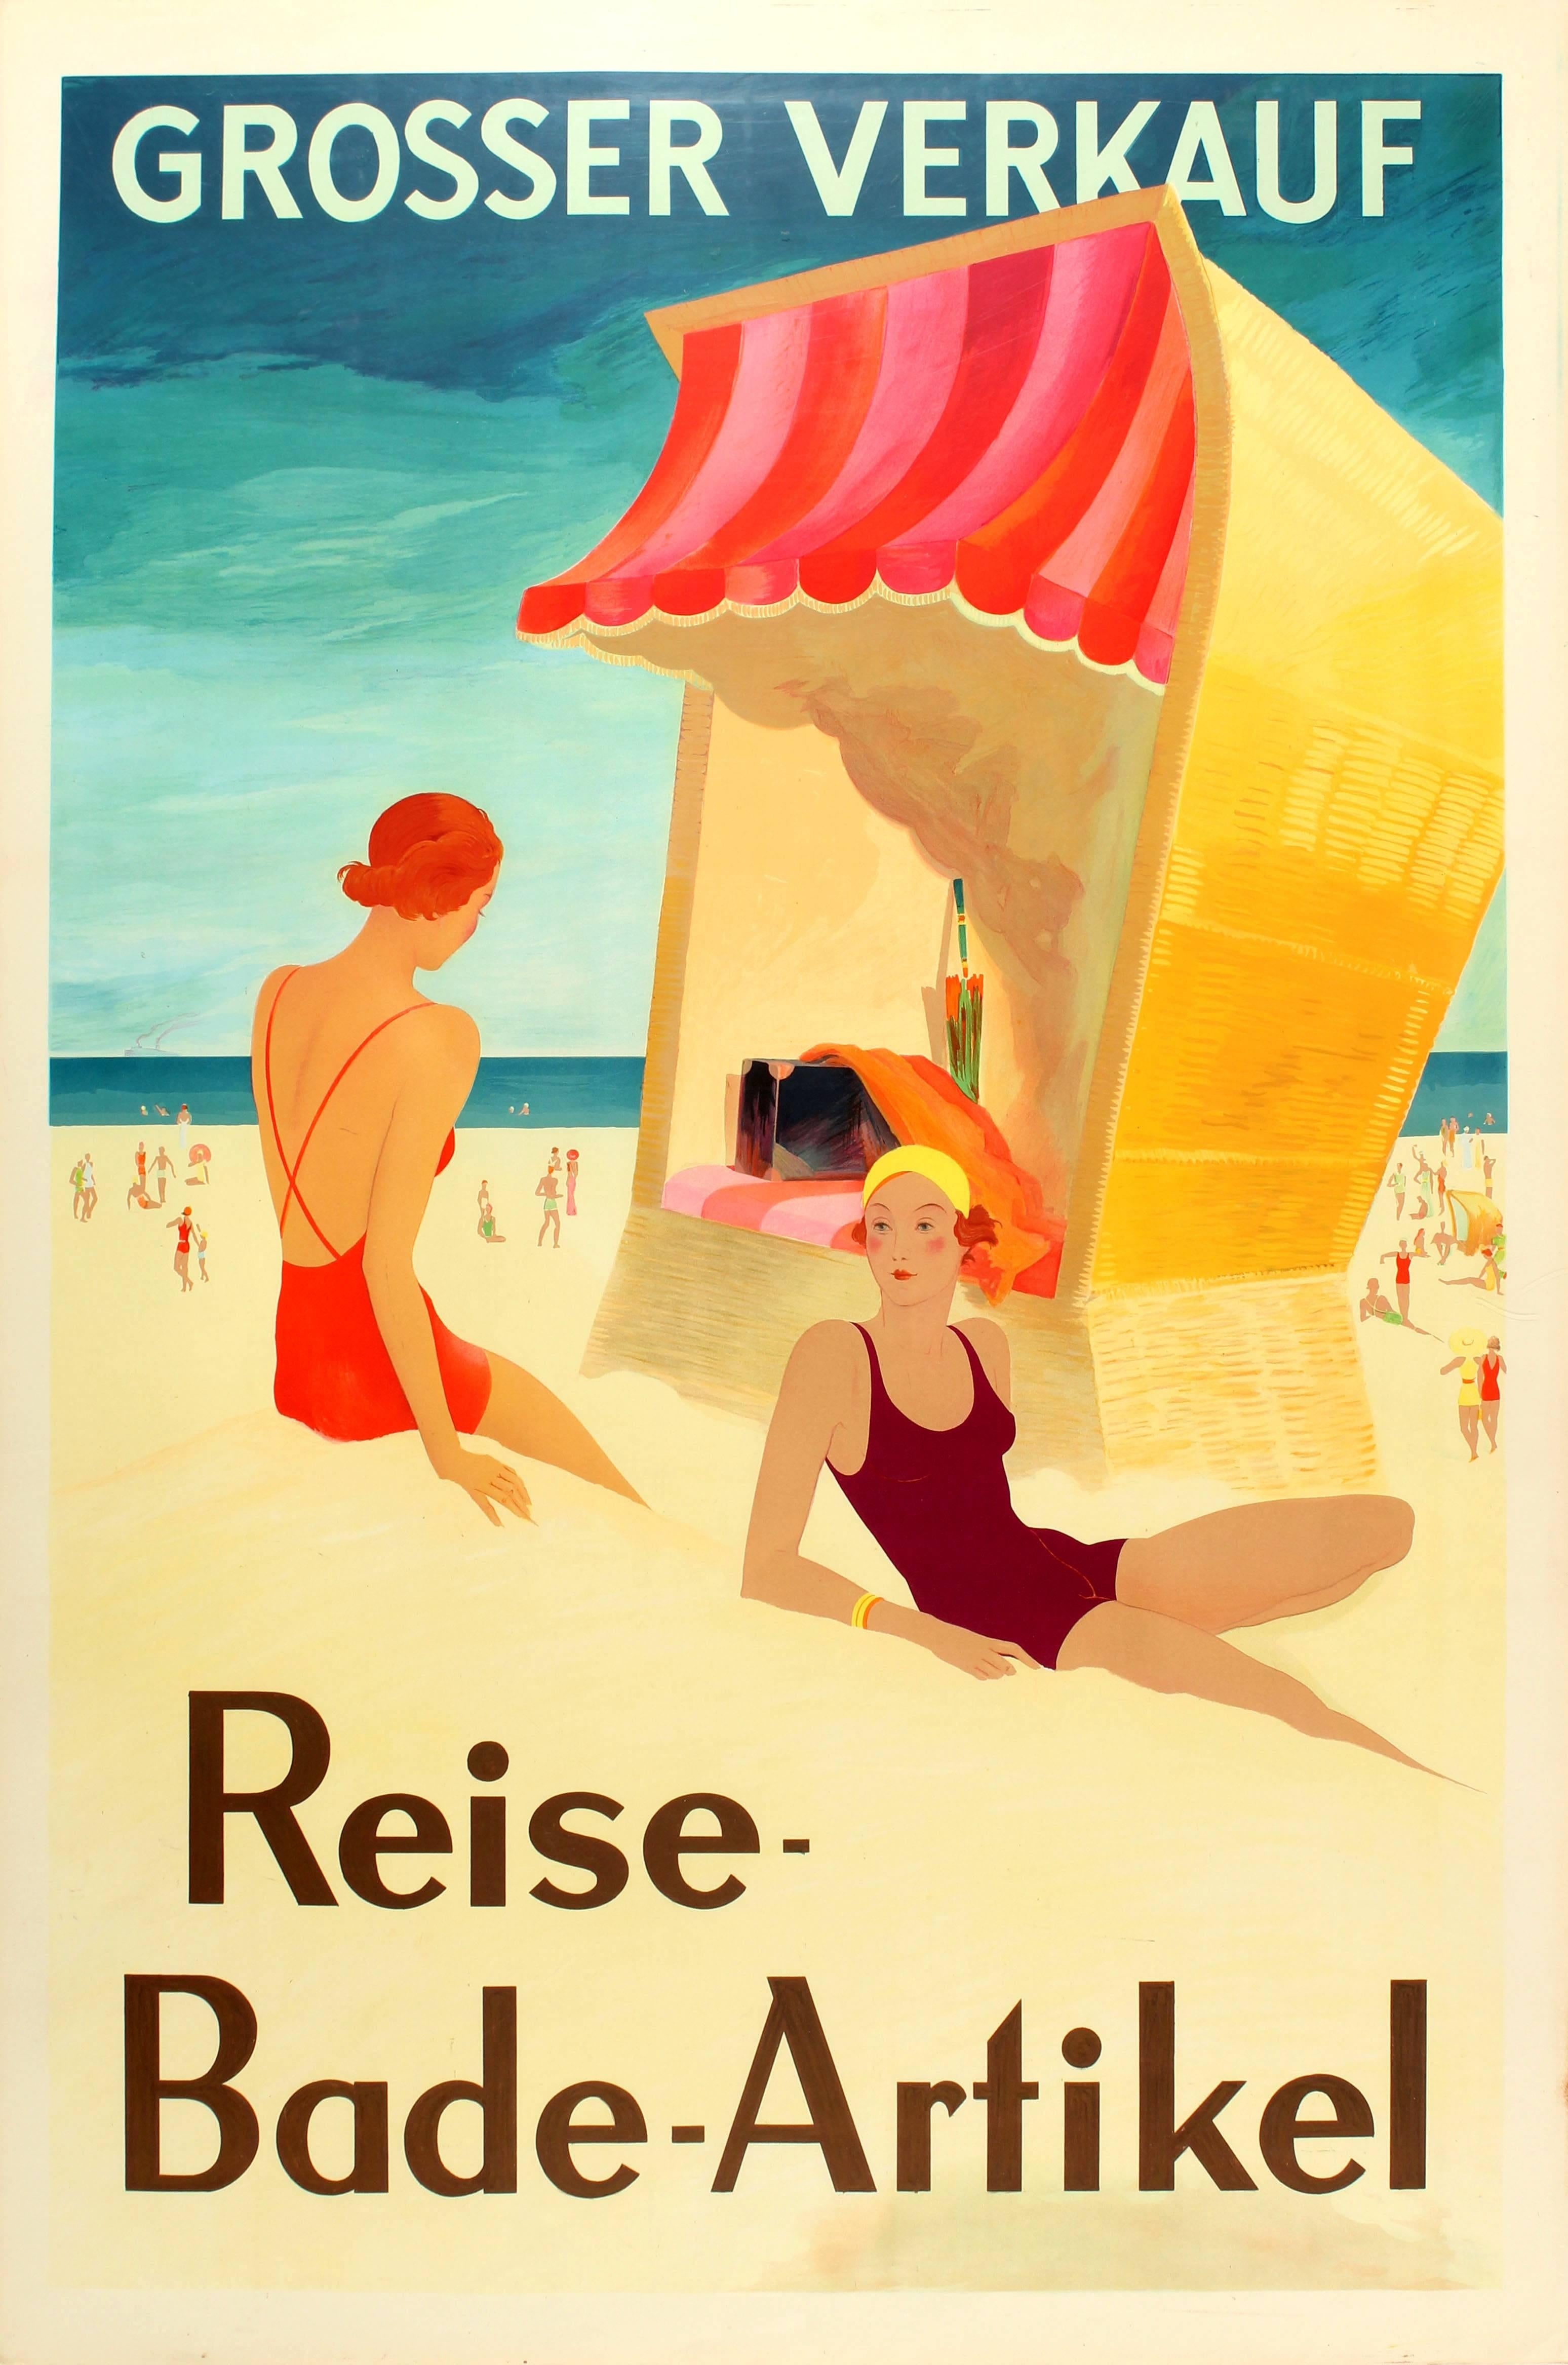 Original Art Deco Poster For A Big Sale Of Holiday Travel & Swimming Accessories